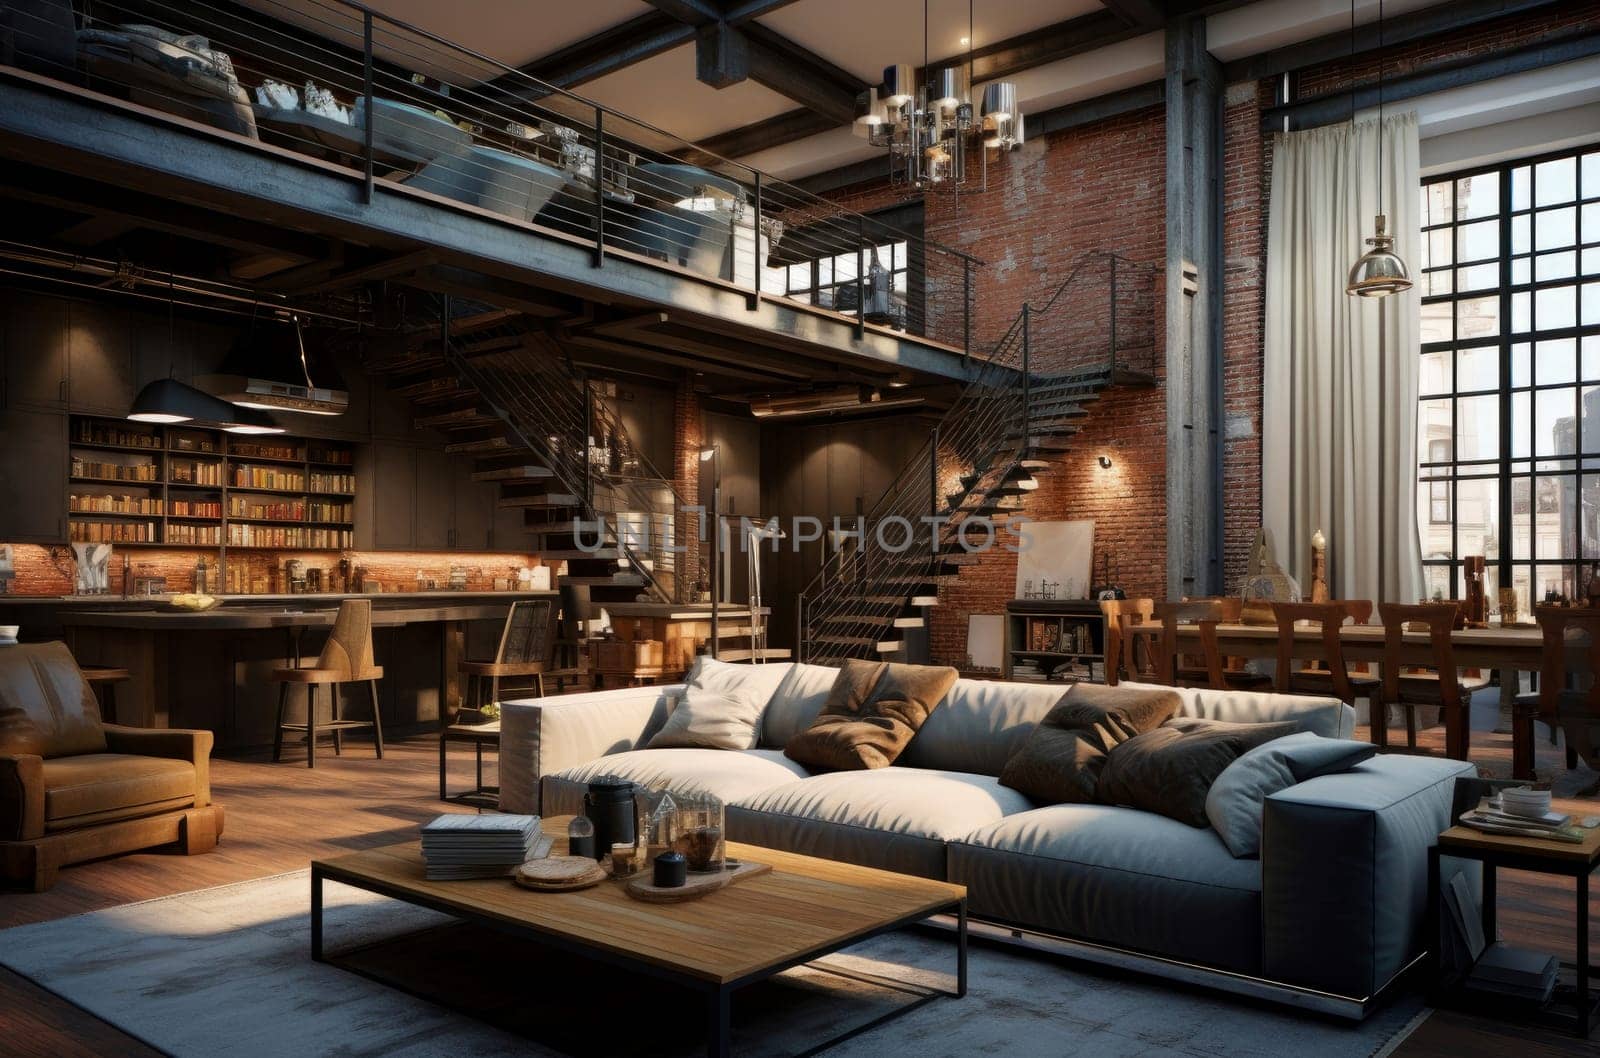 Rustic Loft style house sofa. Generate Ai by ylivdesign